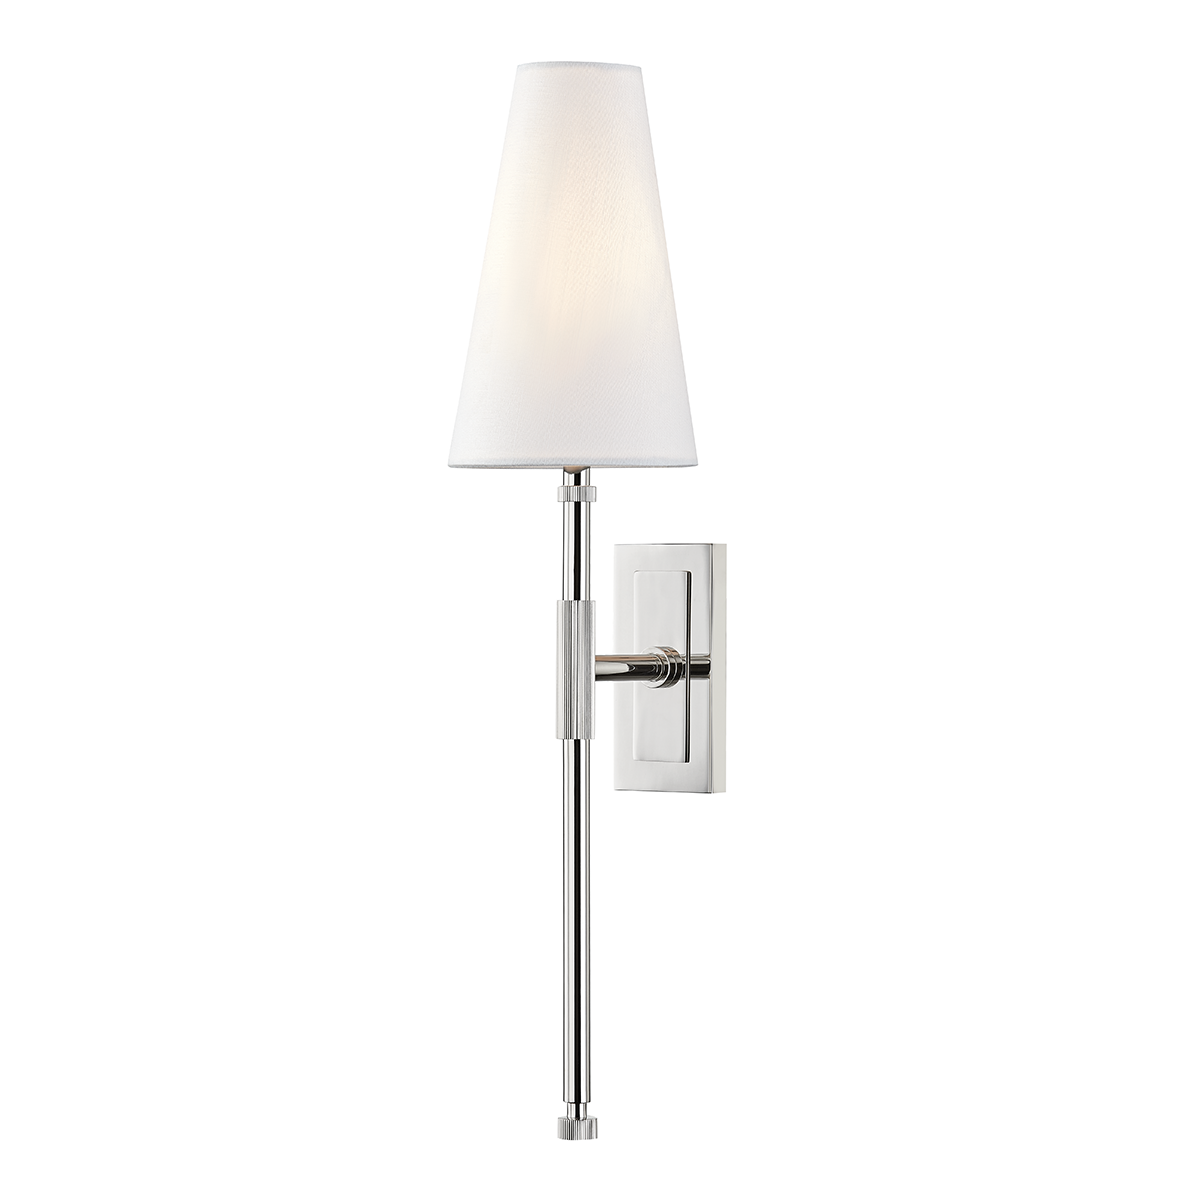 BOWERY WALL SCONCE POLISHED NICKEL